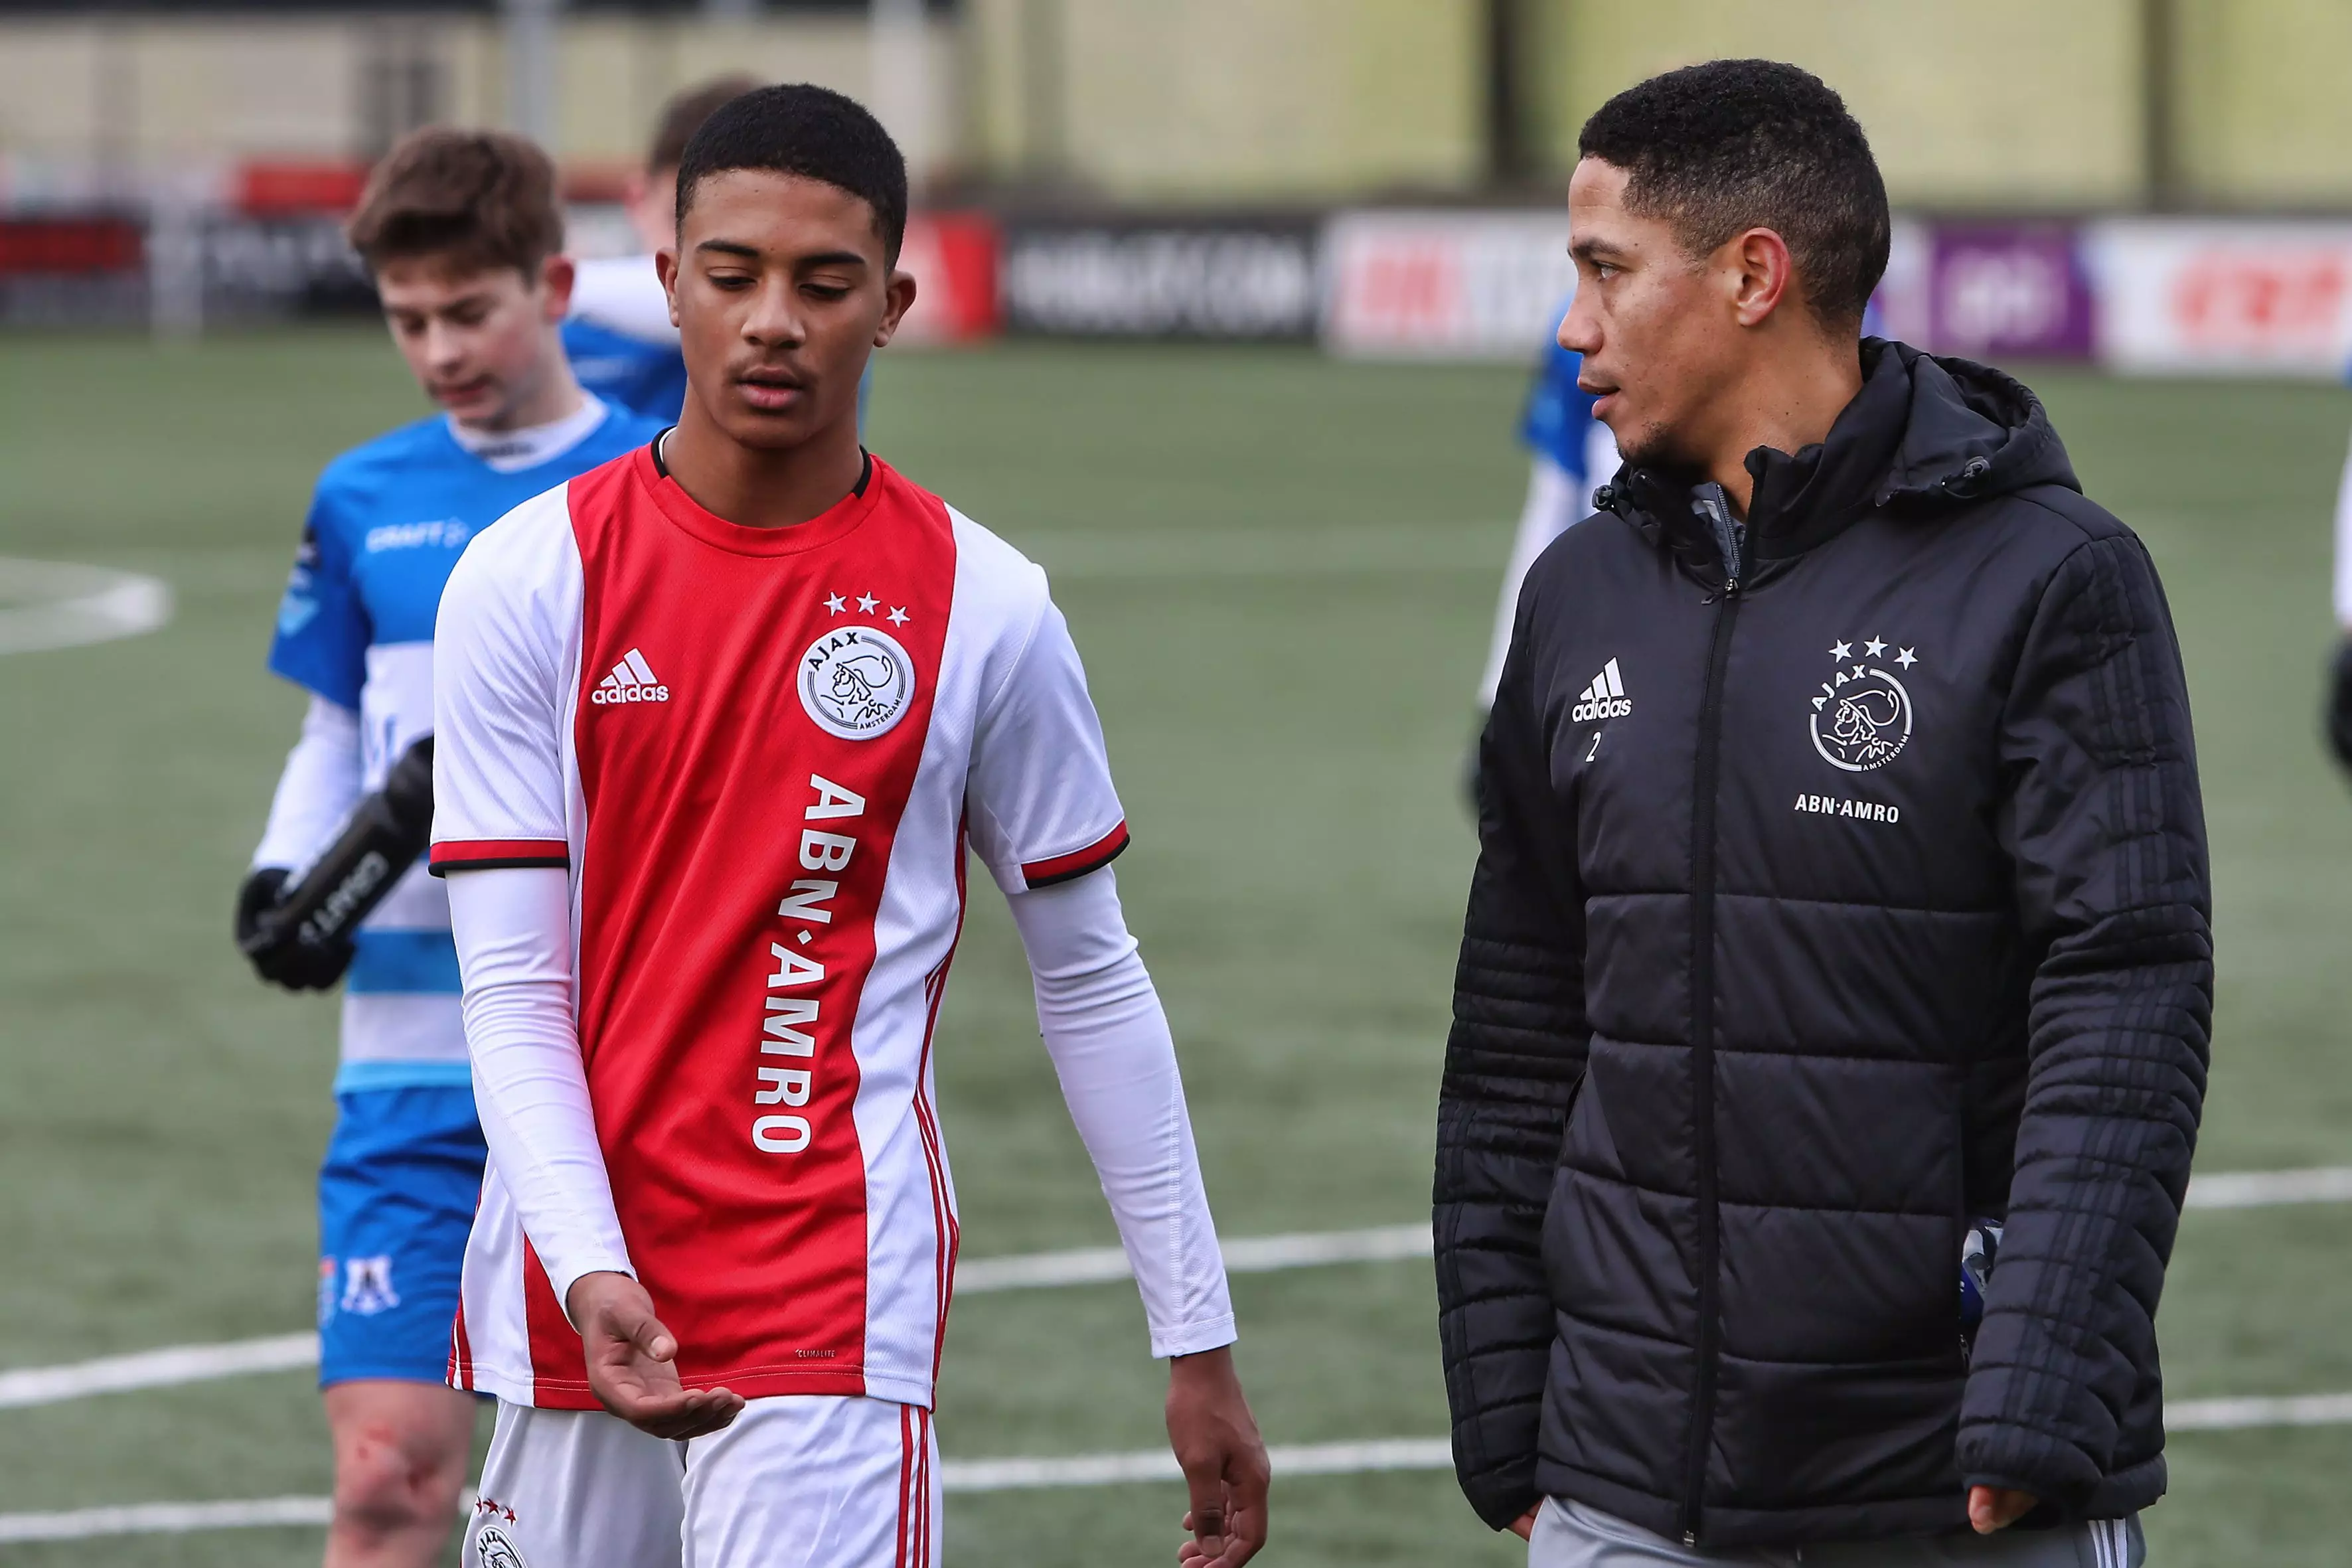 Ajax academy coach Steven Pienaar with one of his players. Image: PA Images